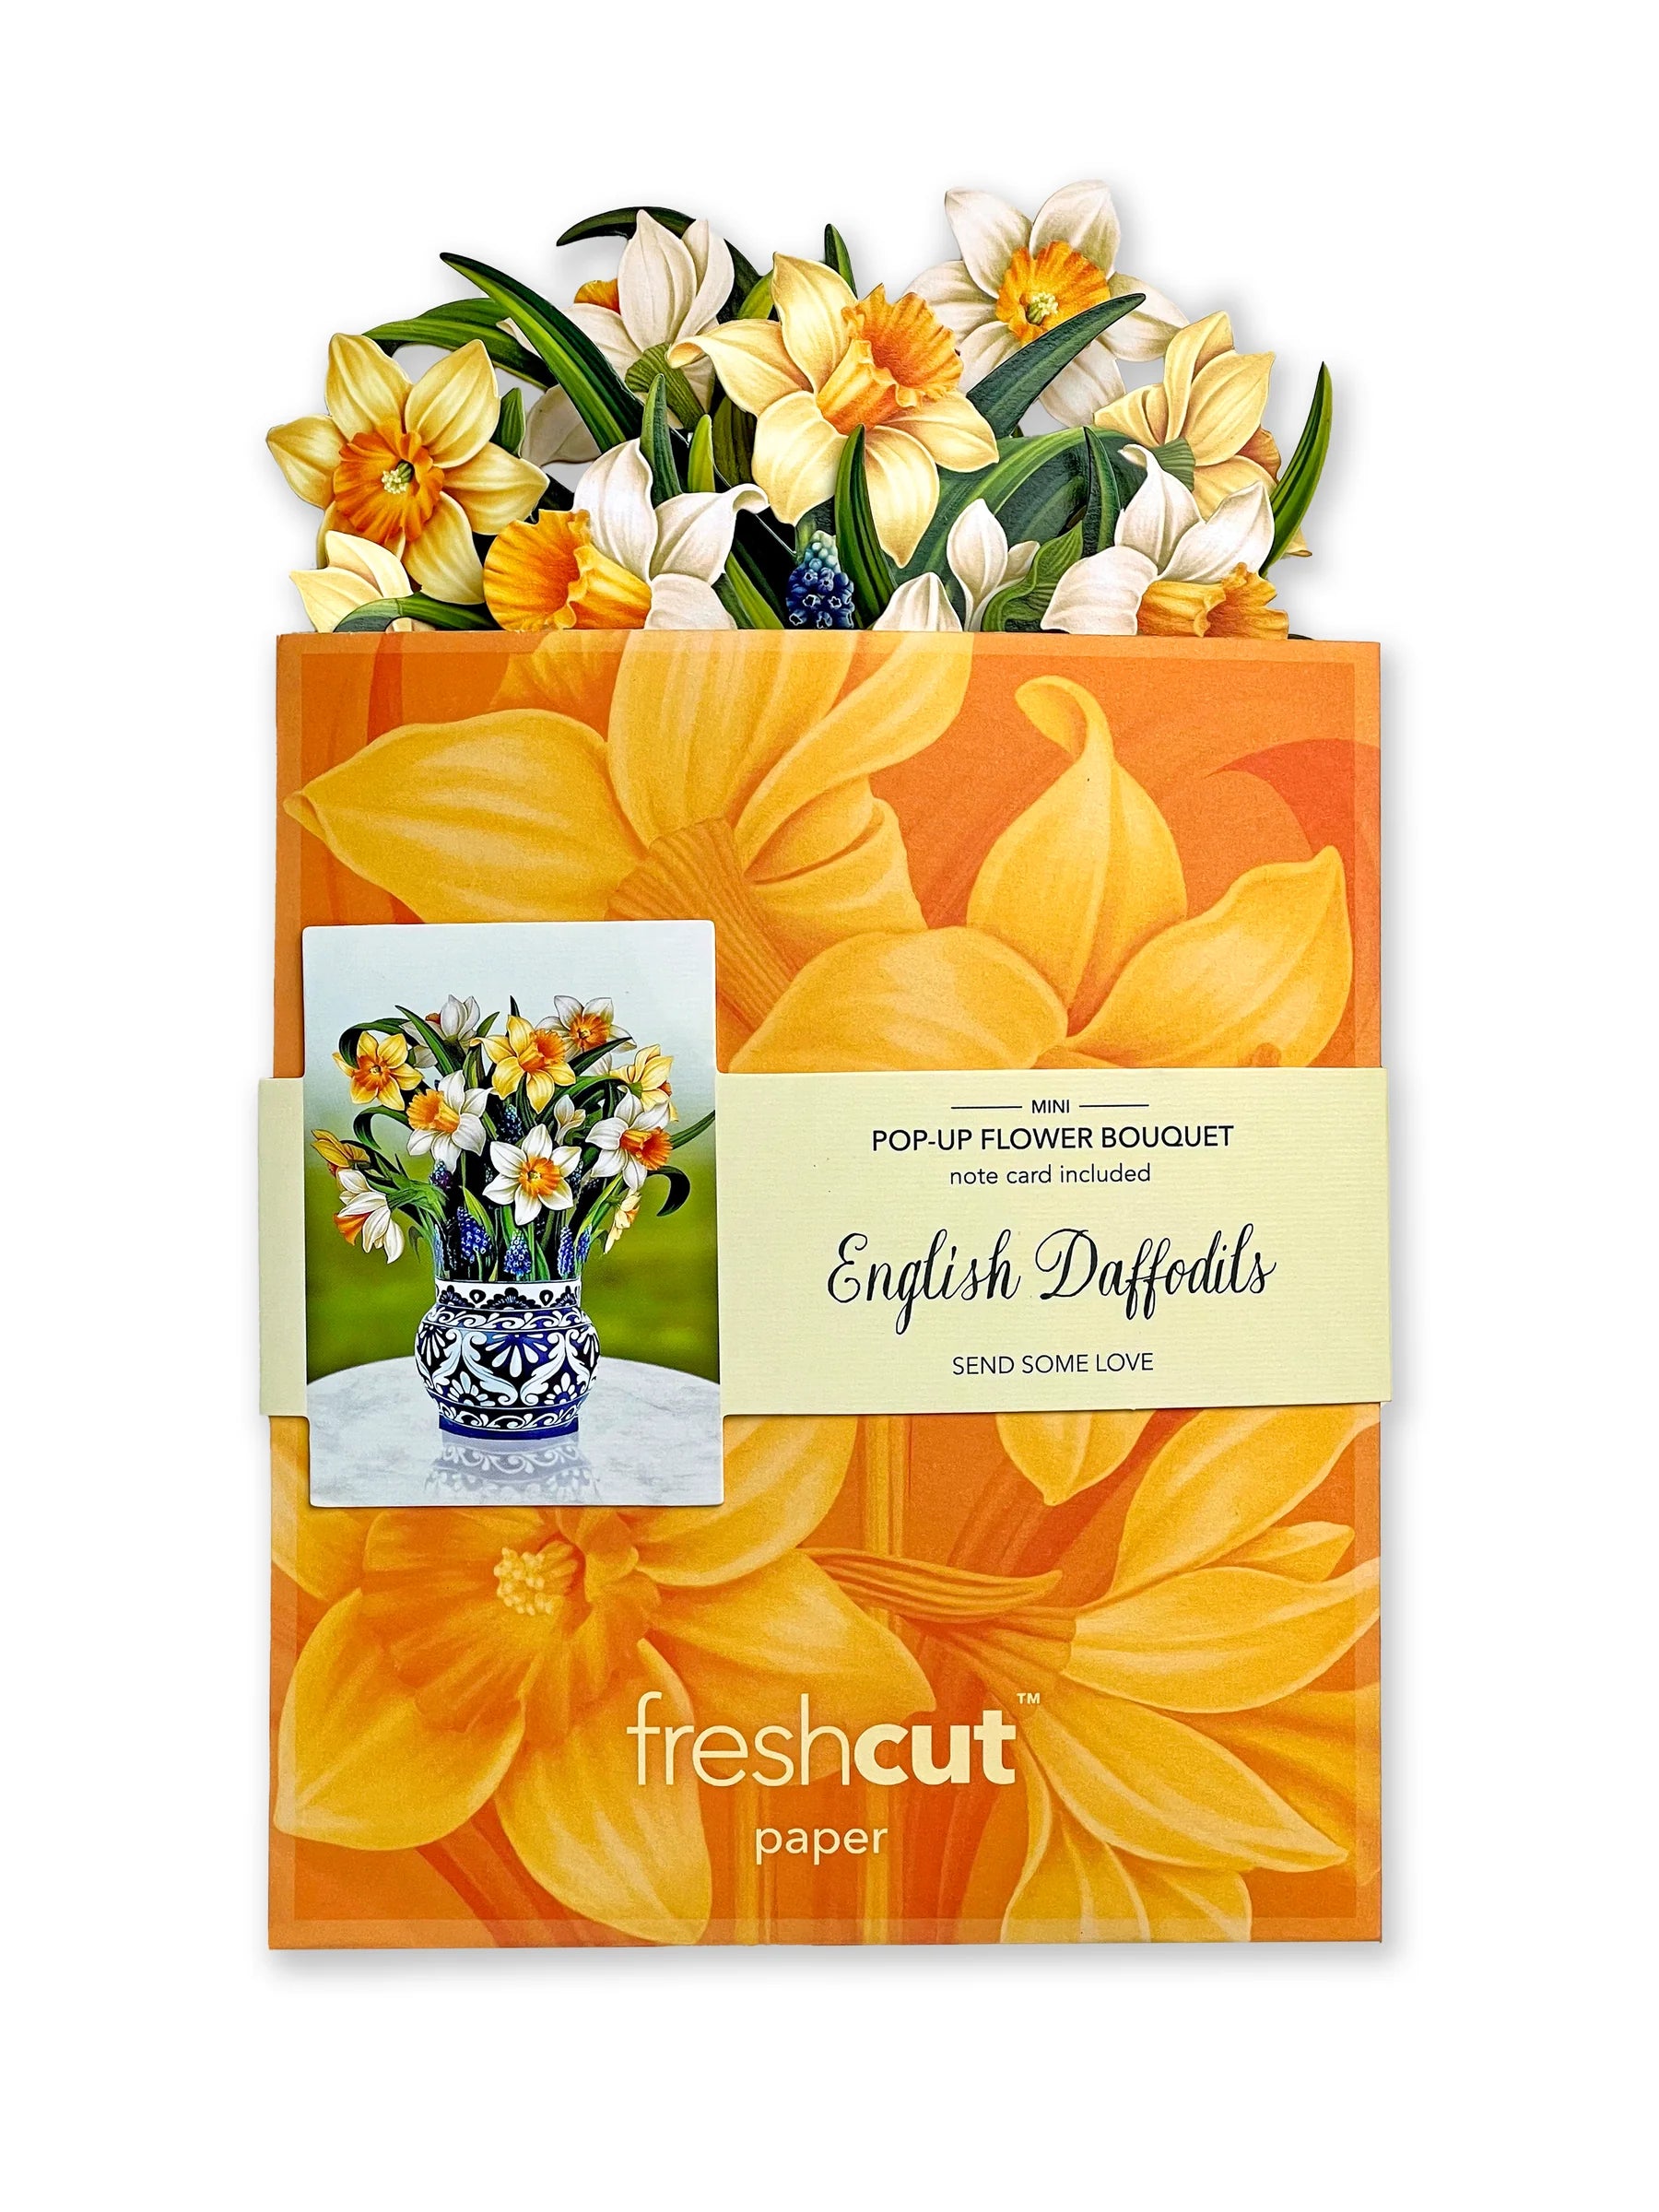 English Daffodils bouquet in its mailing envelope.